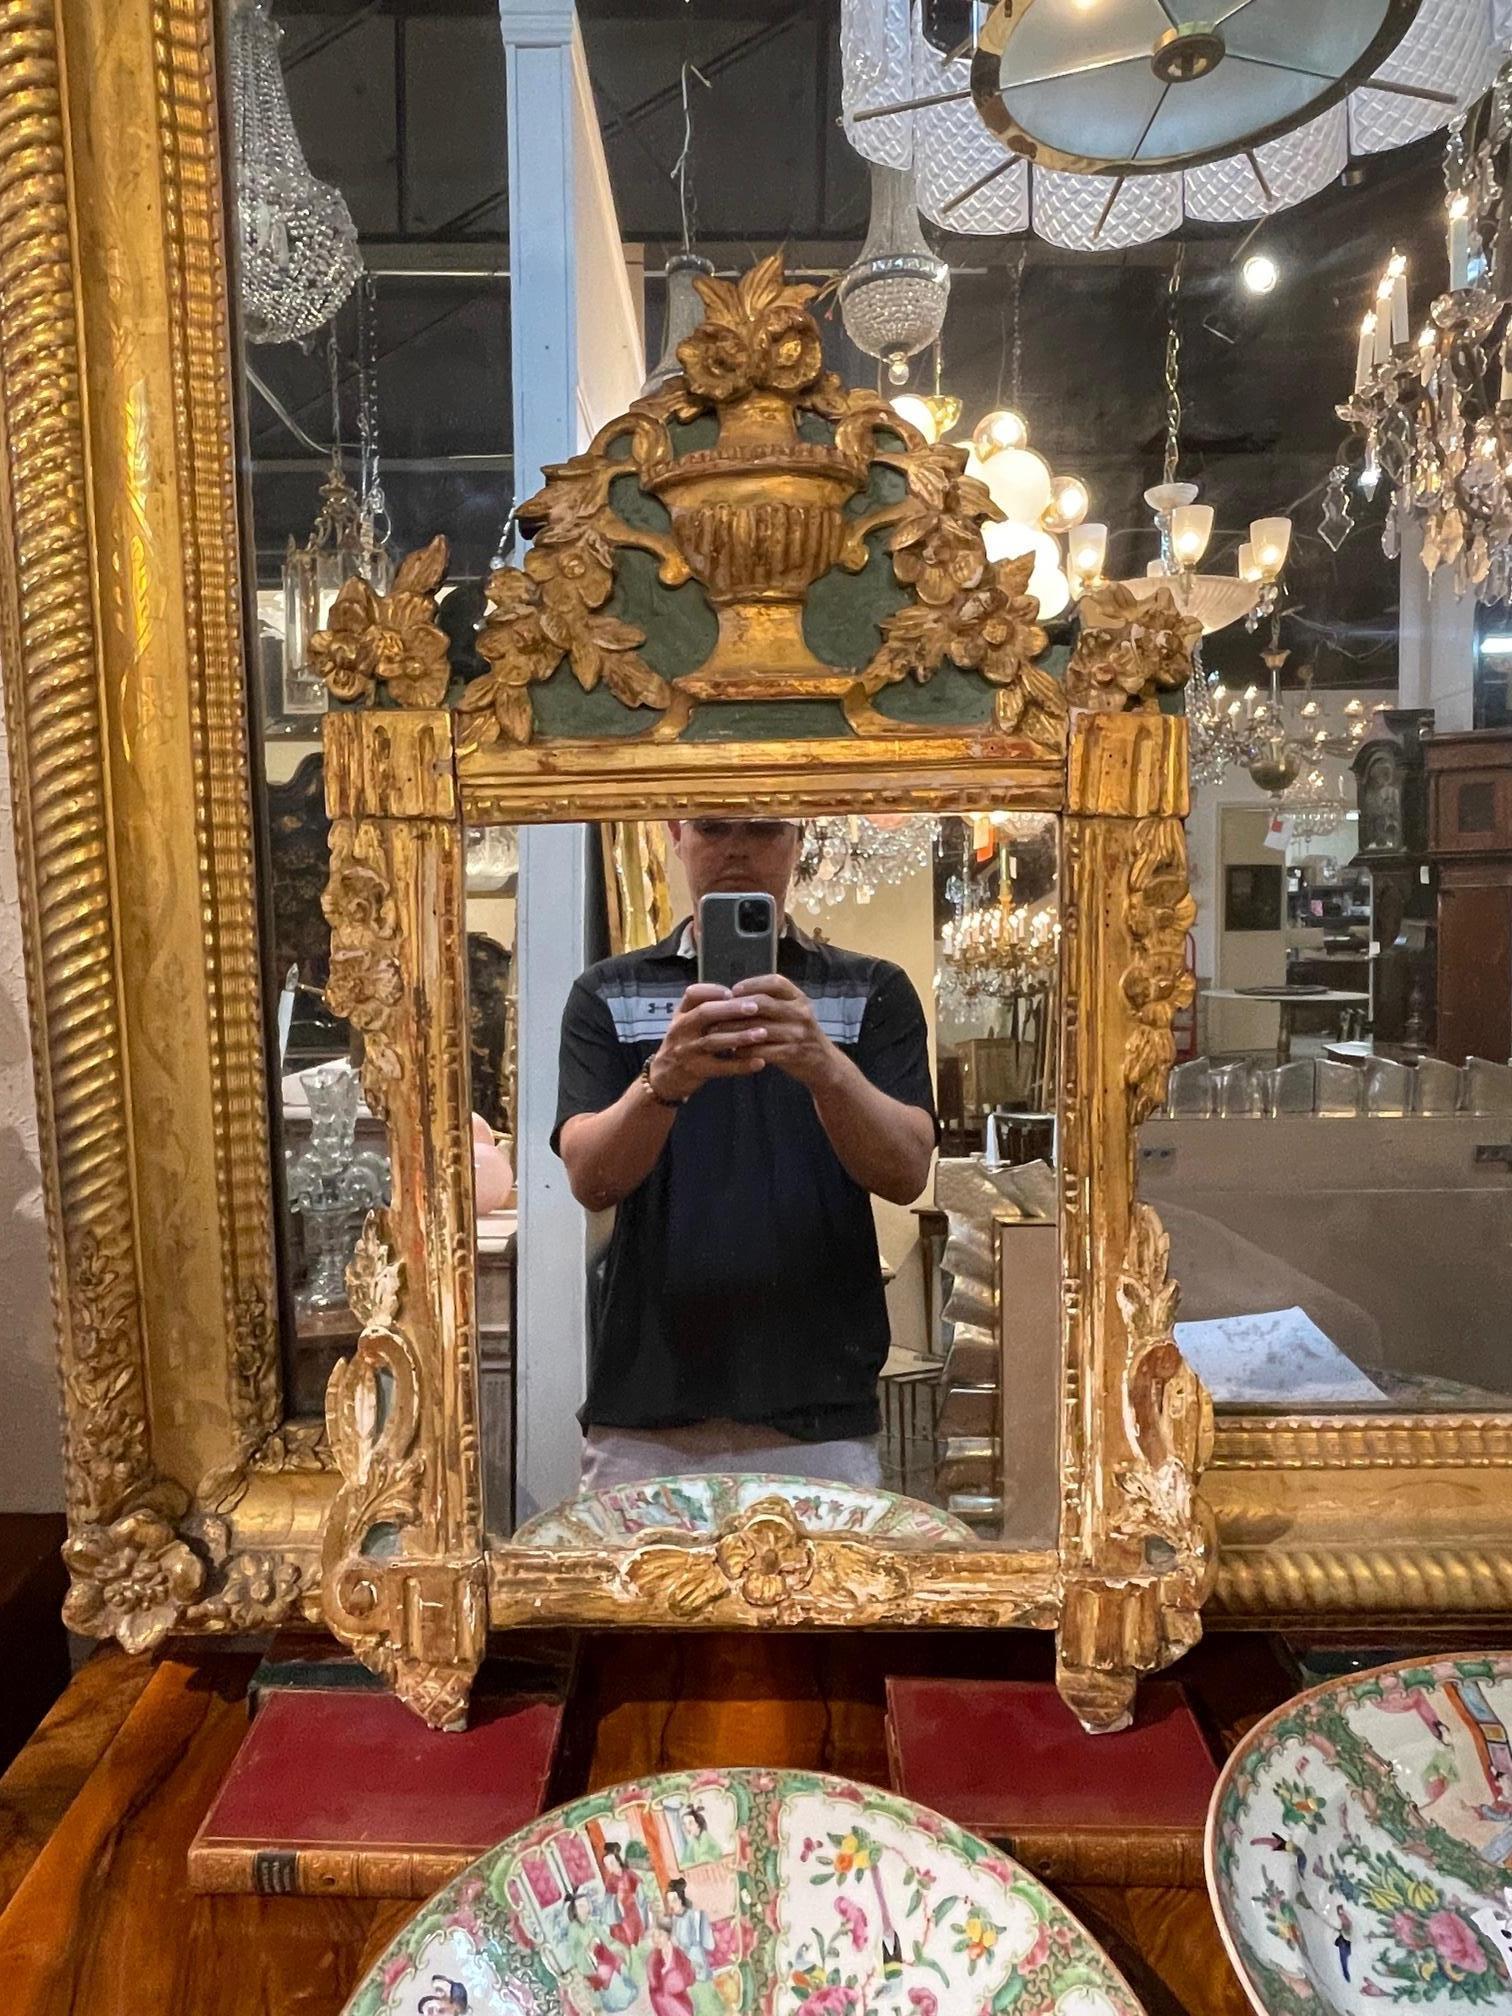 Very fine 18th century Italian carved giltwood mirror. Exceptional carvings including an urn with over flowing flowers. A fabulous focal point for a beautiful room! Lovely patina as well!.